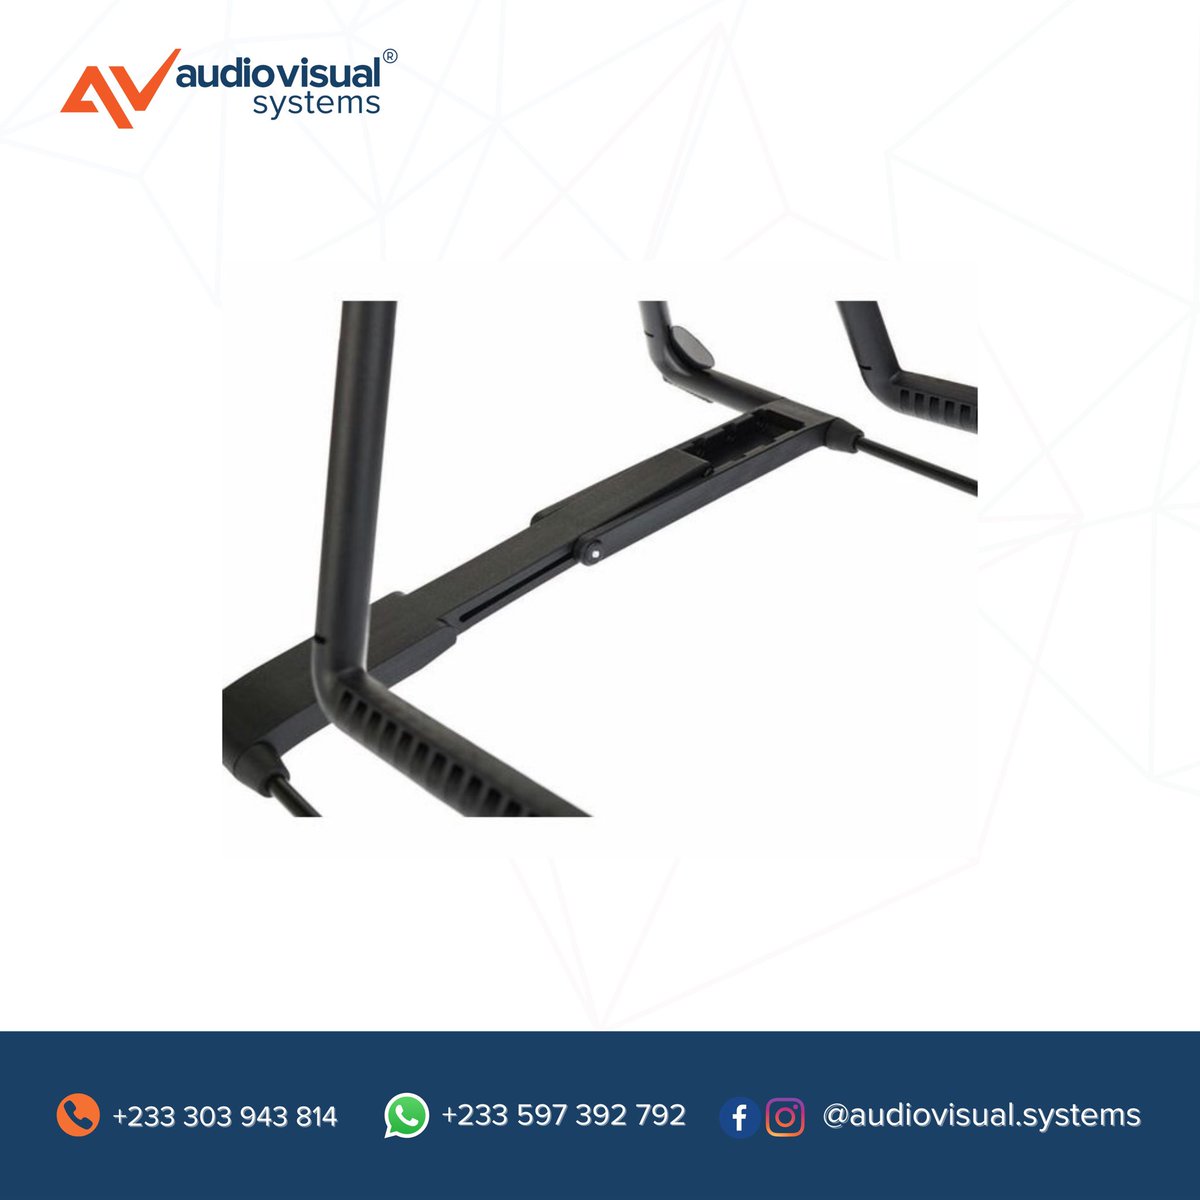 Happy Weekend Guys! Can’t believe it’s Friday already but we’re here for it and not complaining.

Contact us today for your KÖNIG & MEYER 17581 Heli 2 Electric Guitar Stand (Black). 
.
.
.
#audiovisualsystems #königandmeyer #guitar #guitarists #guitarstands #guitarstand